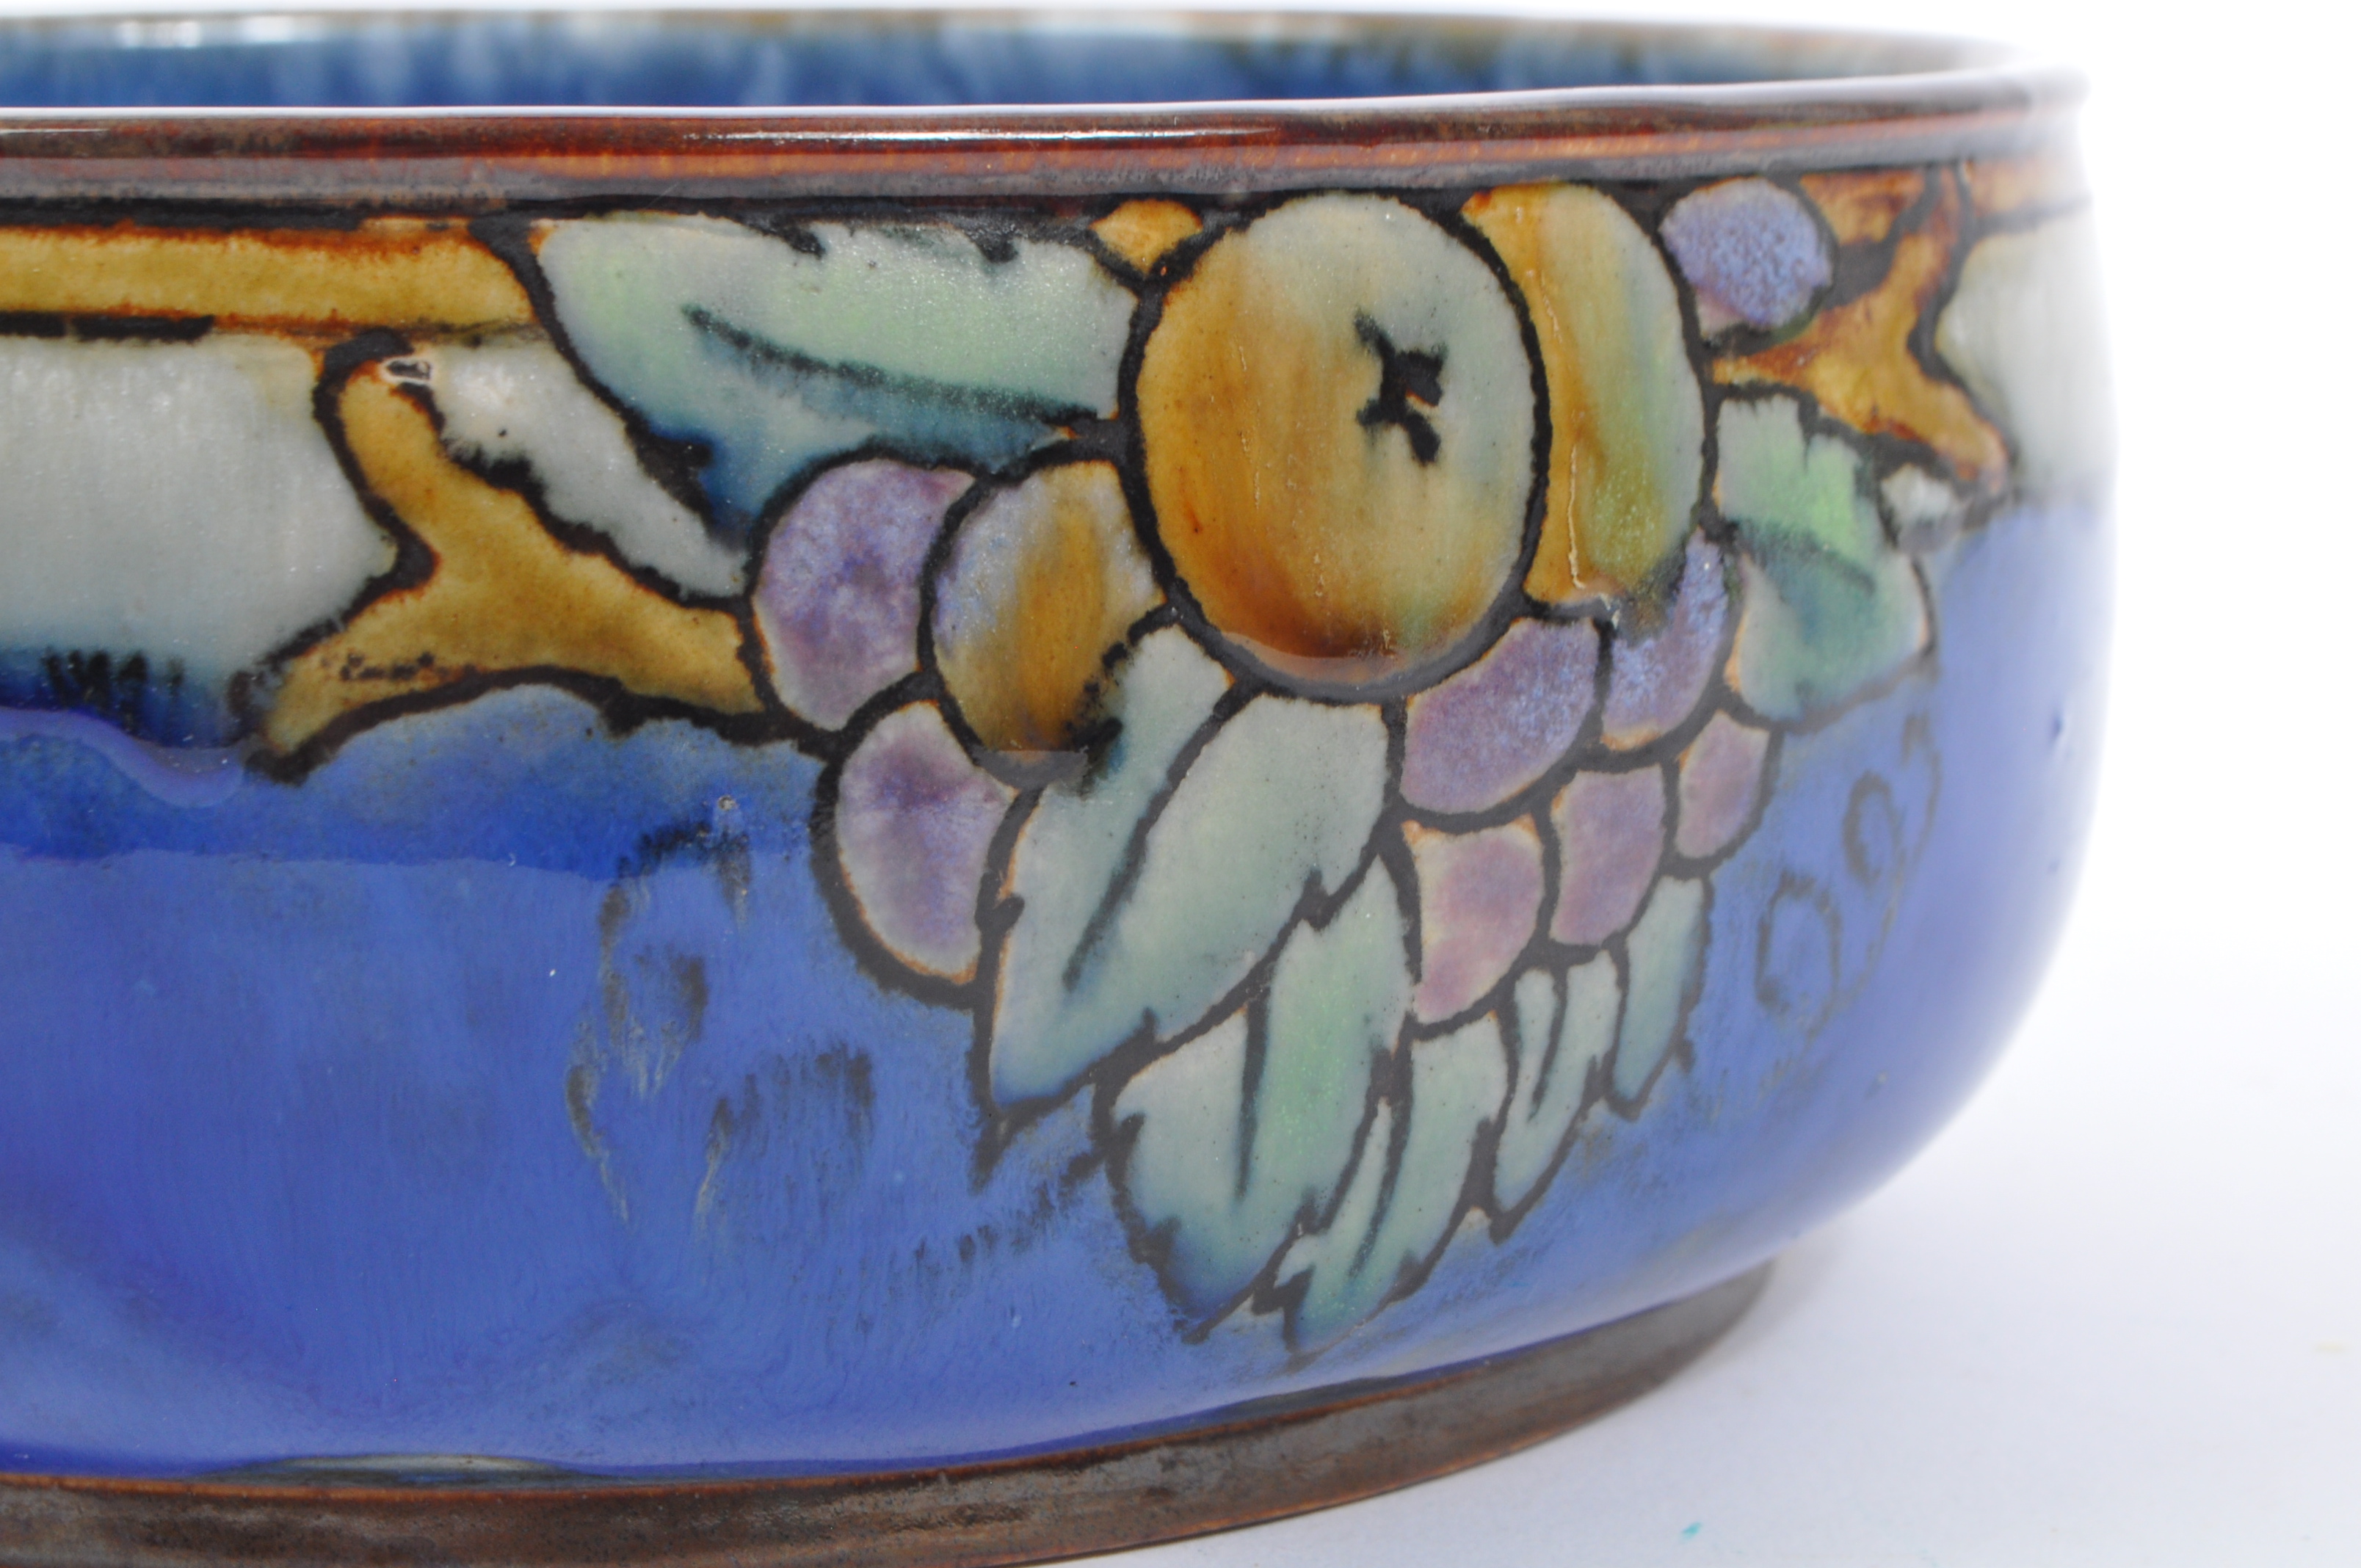 MID 20TH CENTURY STONEWARE FRUIT BOWL 8530Y BY ROYAL DOULTON - Image 4 of 5